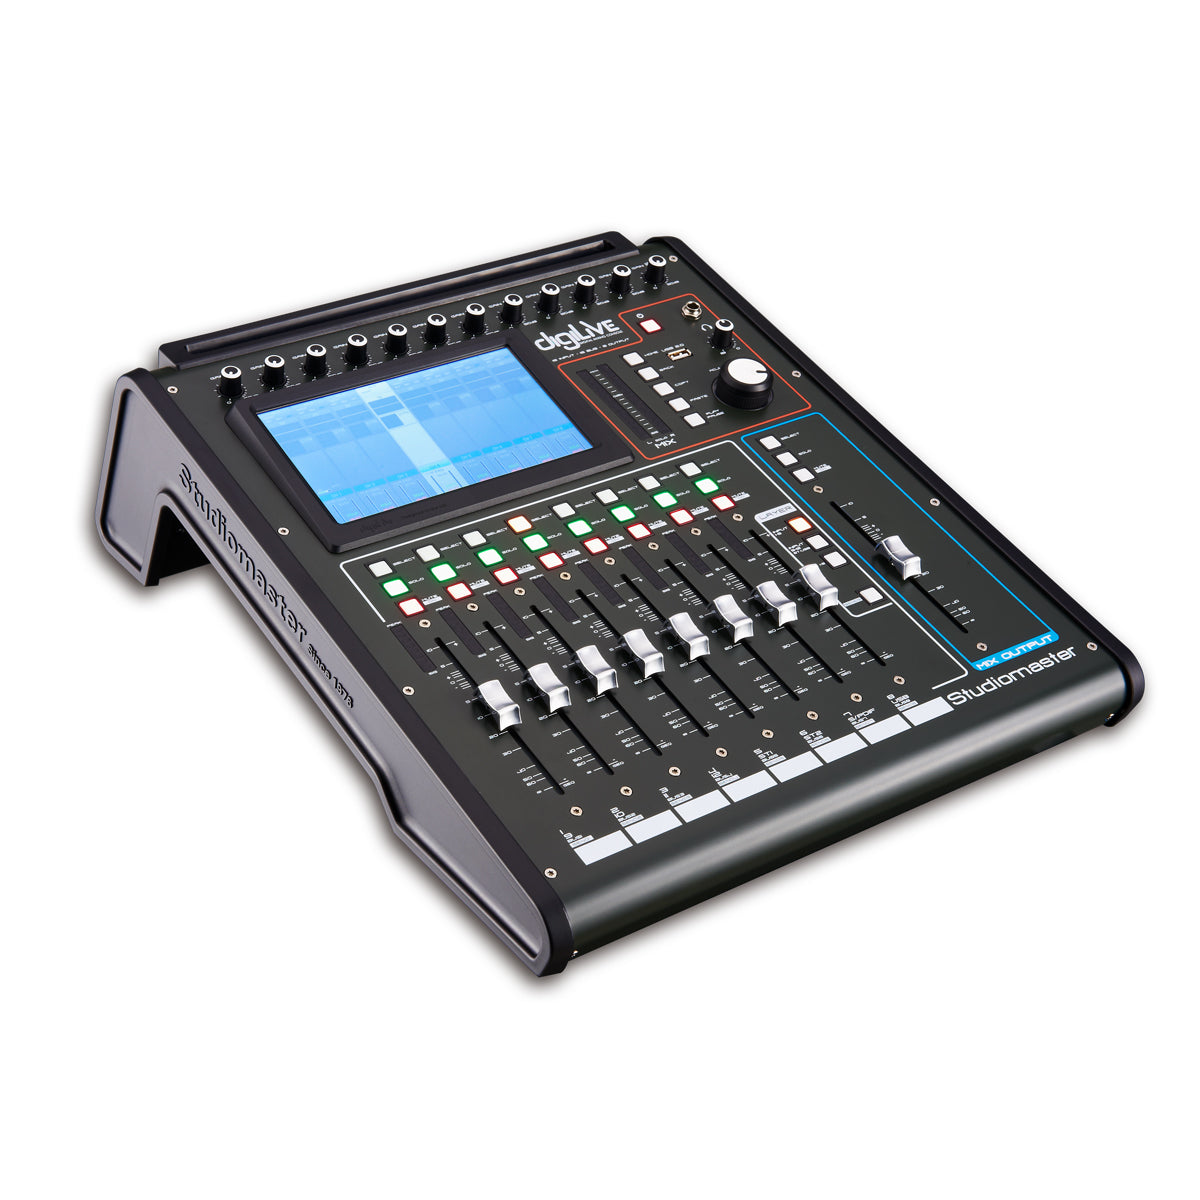 Studiomaster Digilive 16 16-Channel Digital Mixing Console